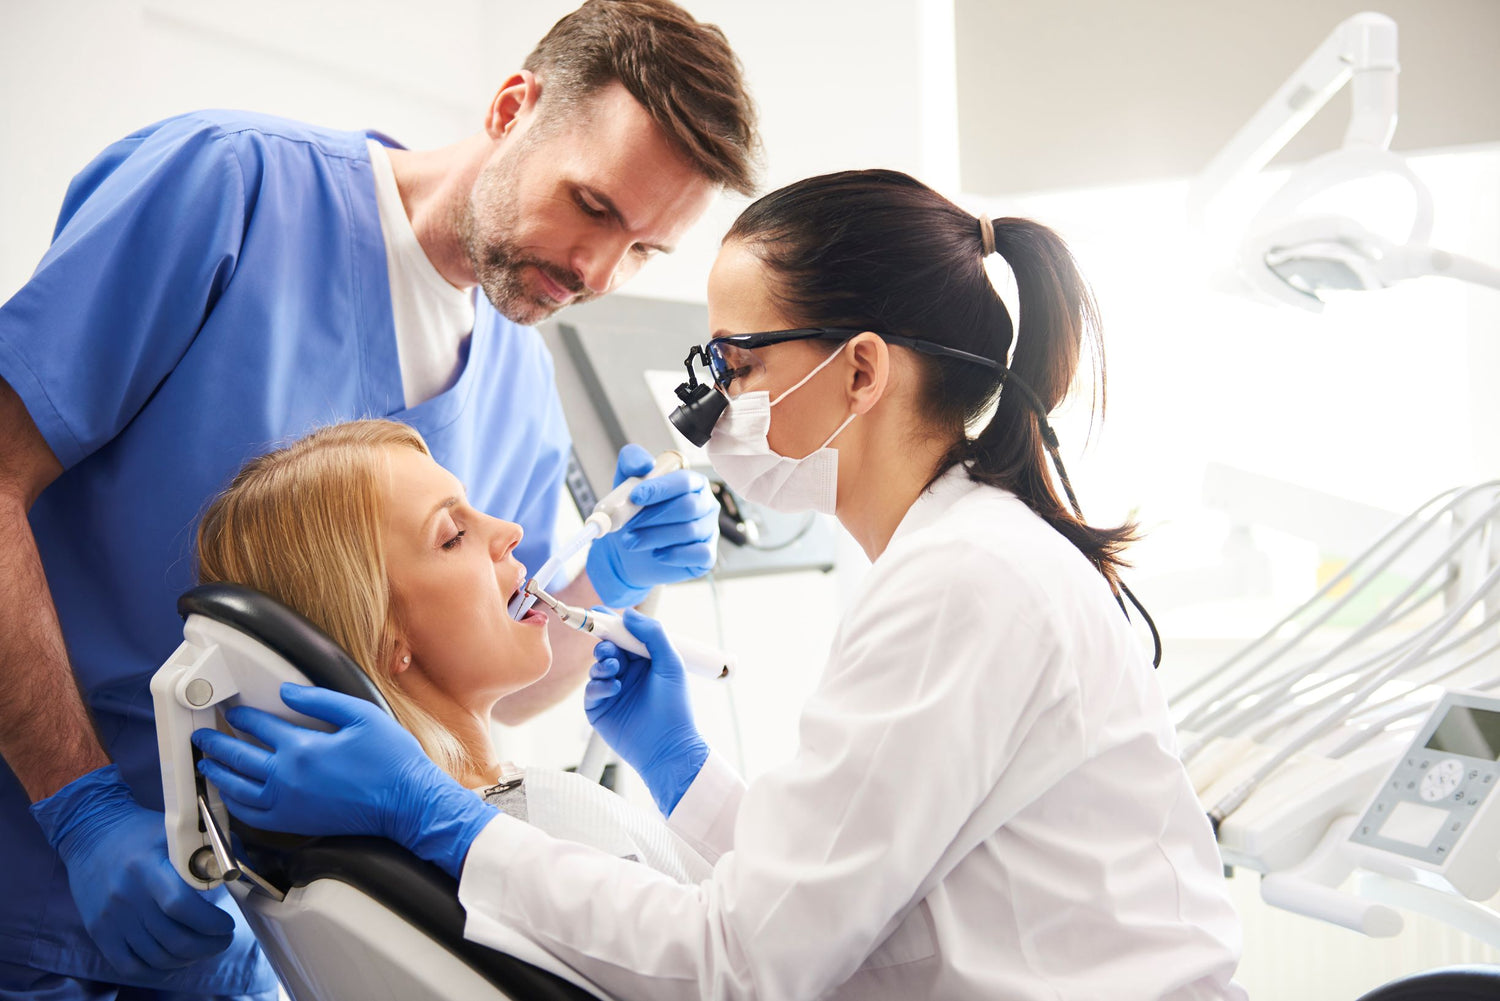 What is it like to be a Dental Hygienist?